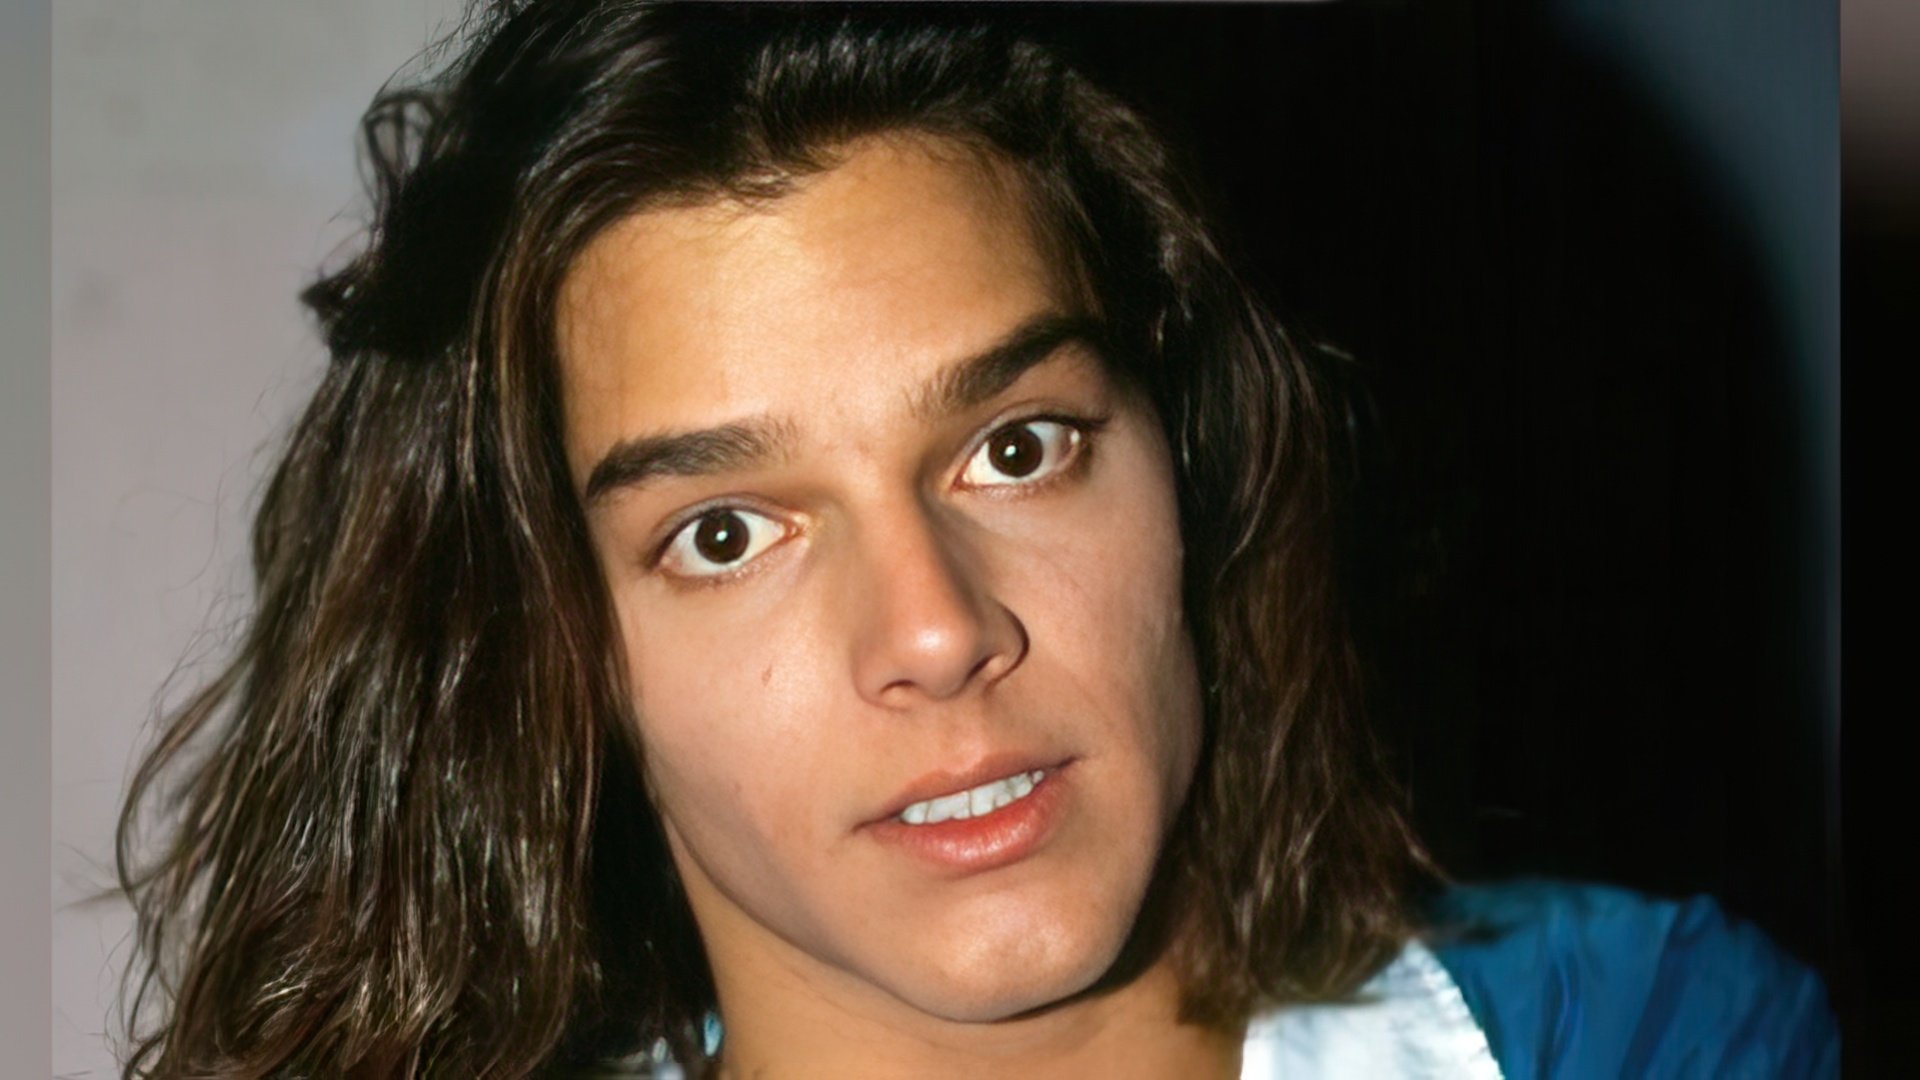 In his youth, Ricky Martin had long hair